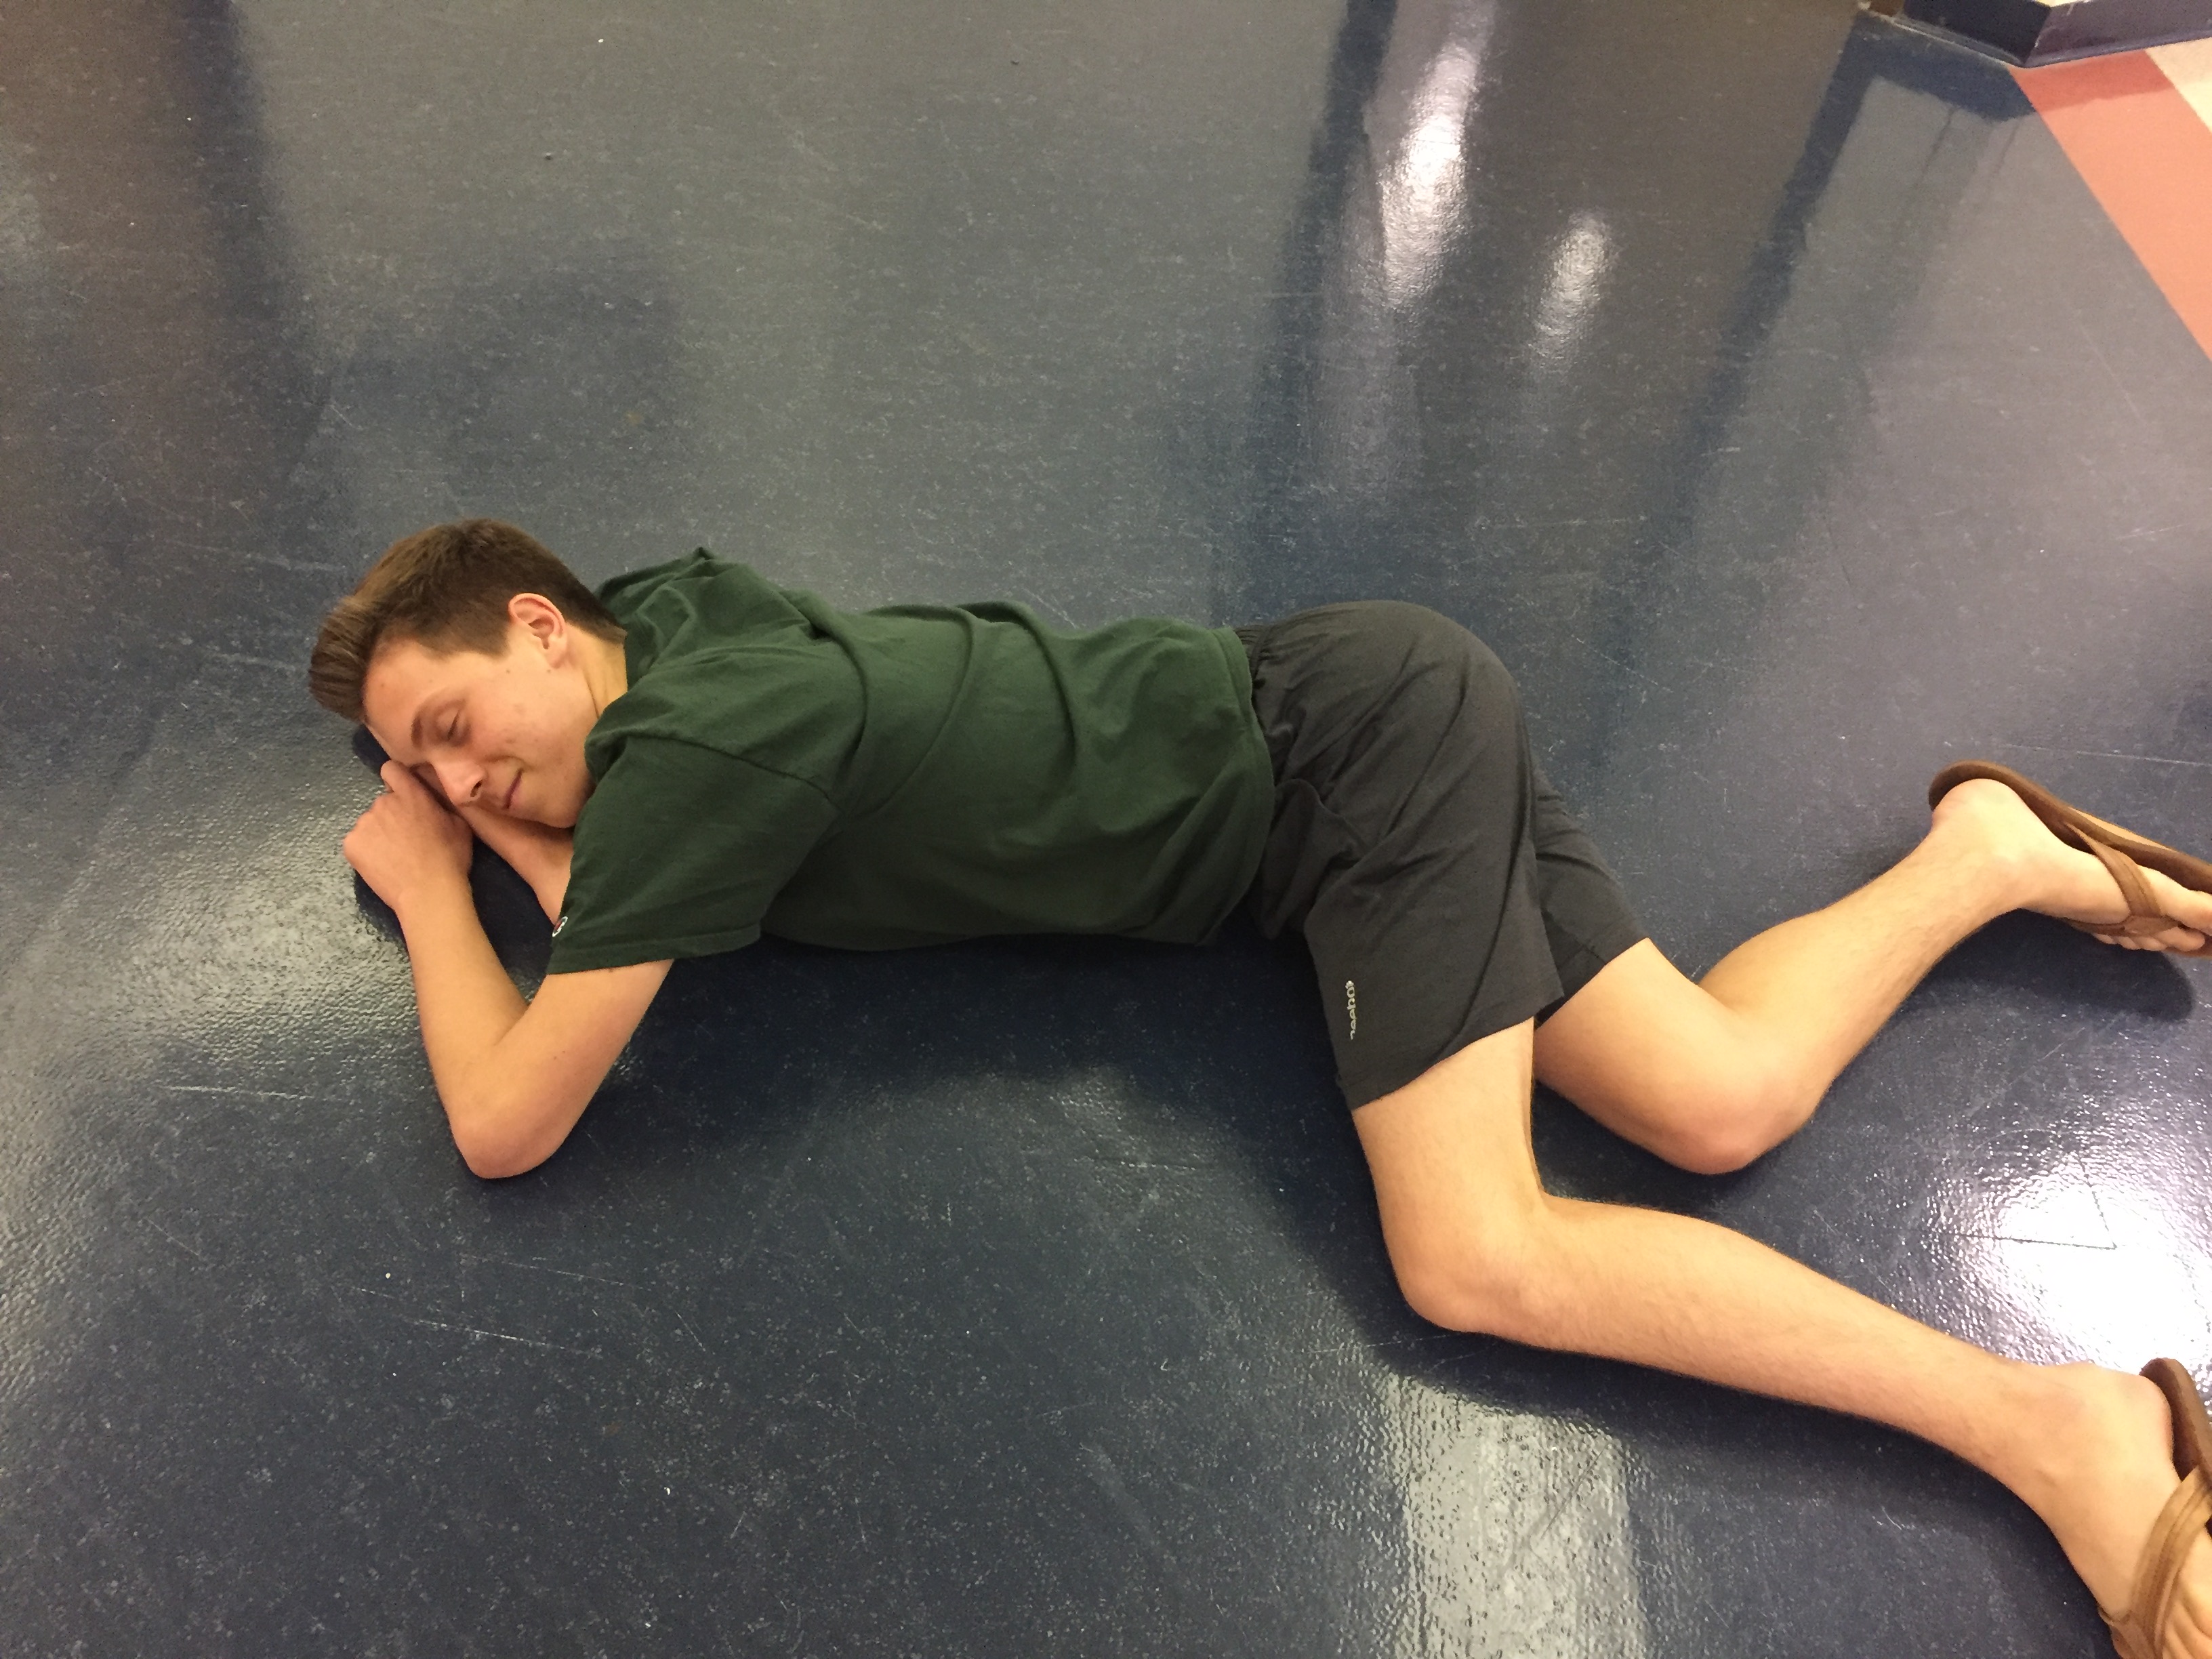 Junior Alex Wilson naps in the middle of the hallway. Who knows what he's dreaming about? (PHOTO BY KAPCAR)